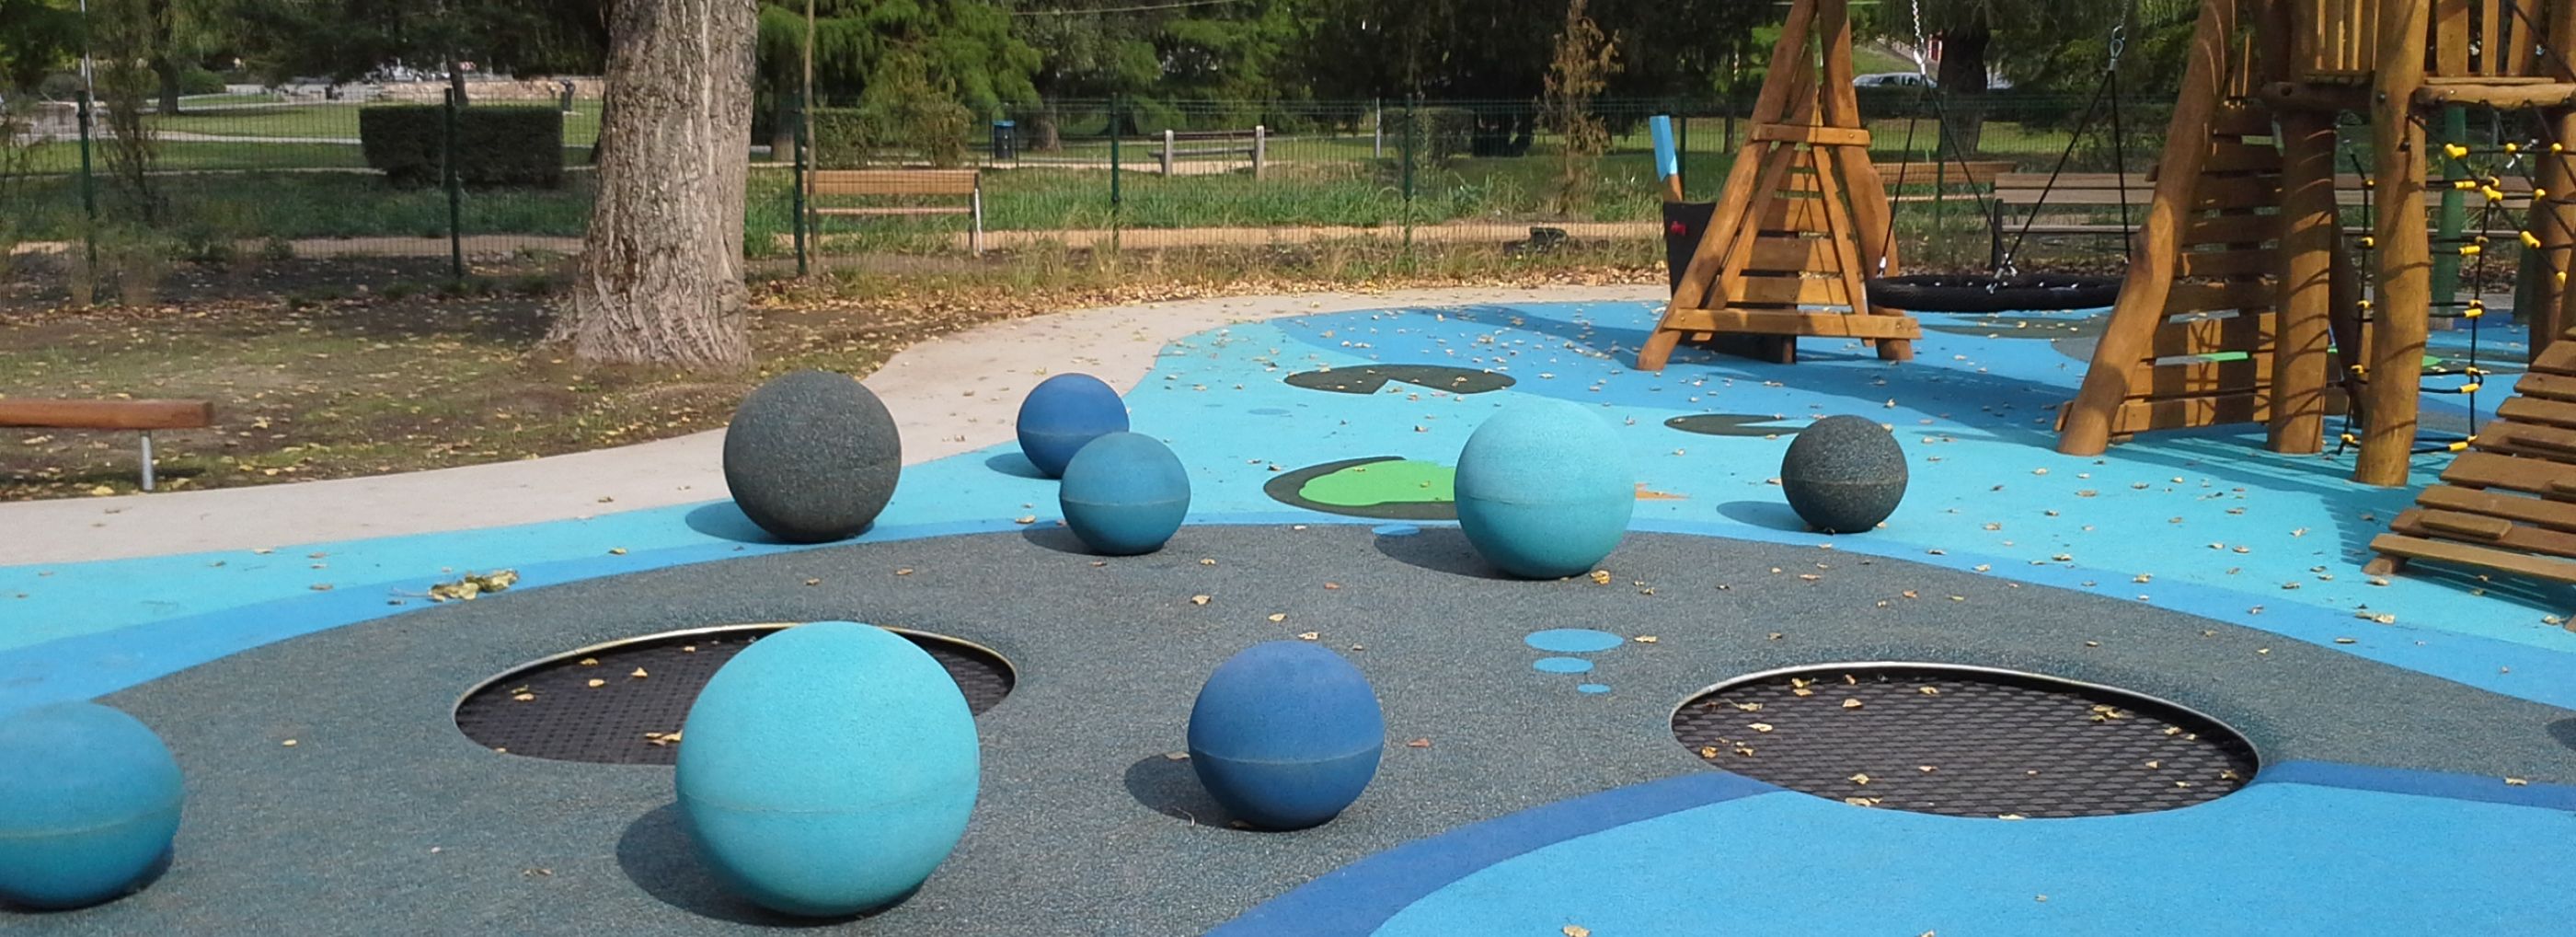 Blue coloured outdoor playground with plus spheres in different sizes and tones of blue.